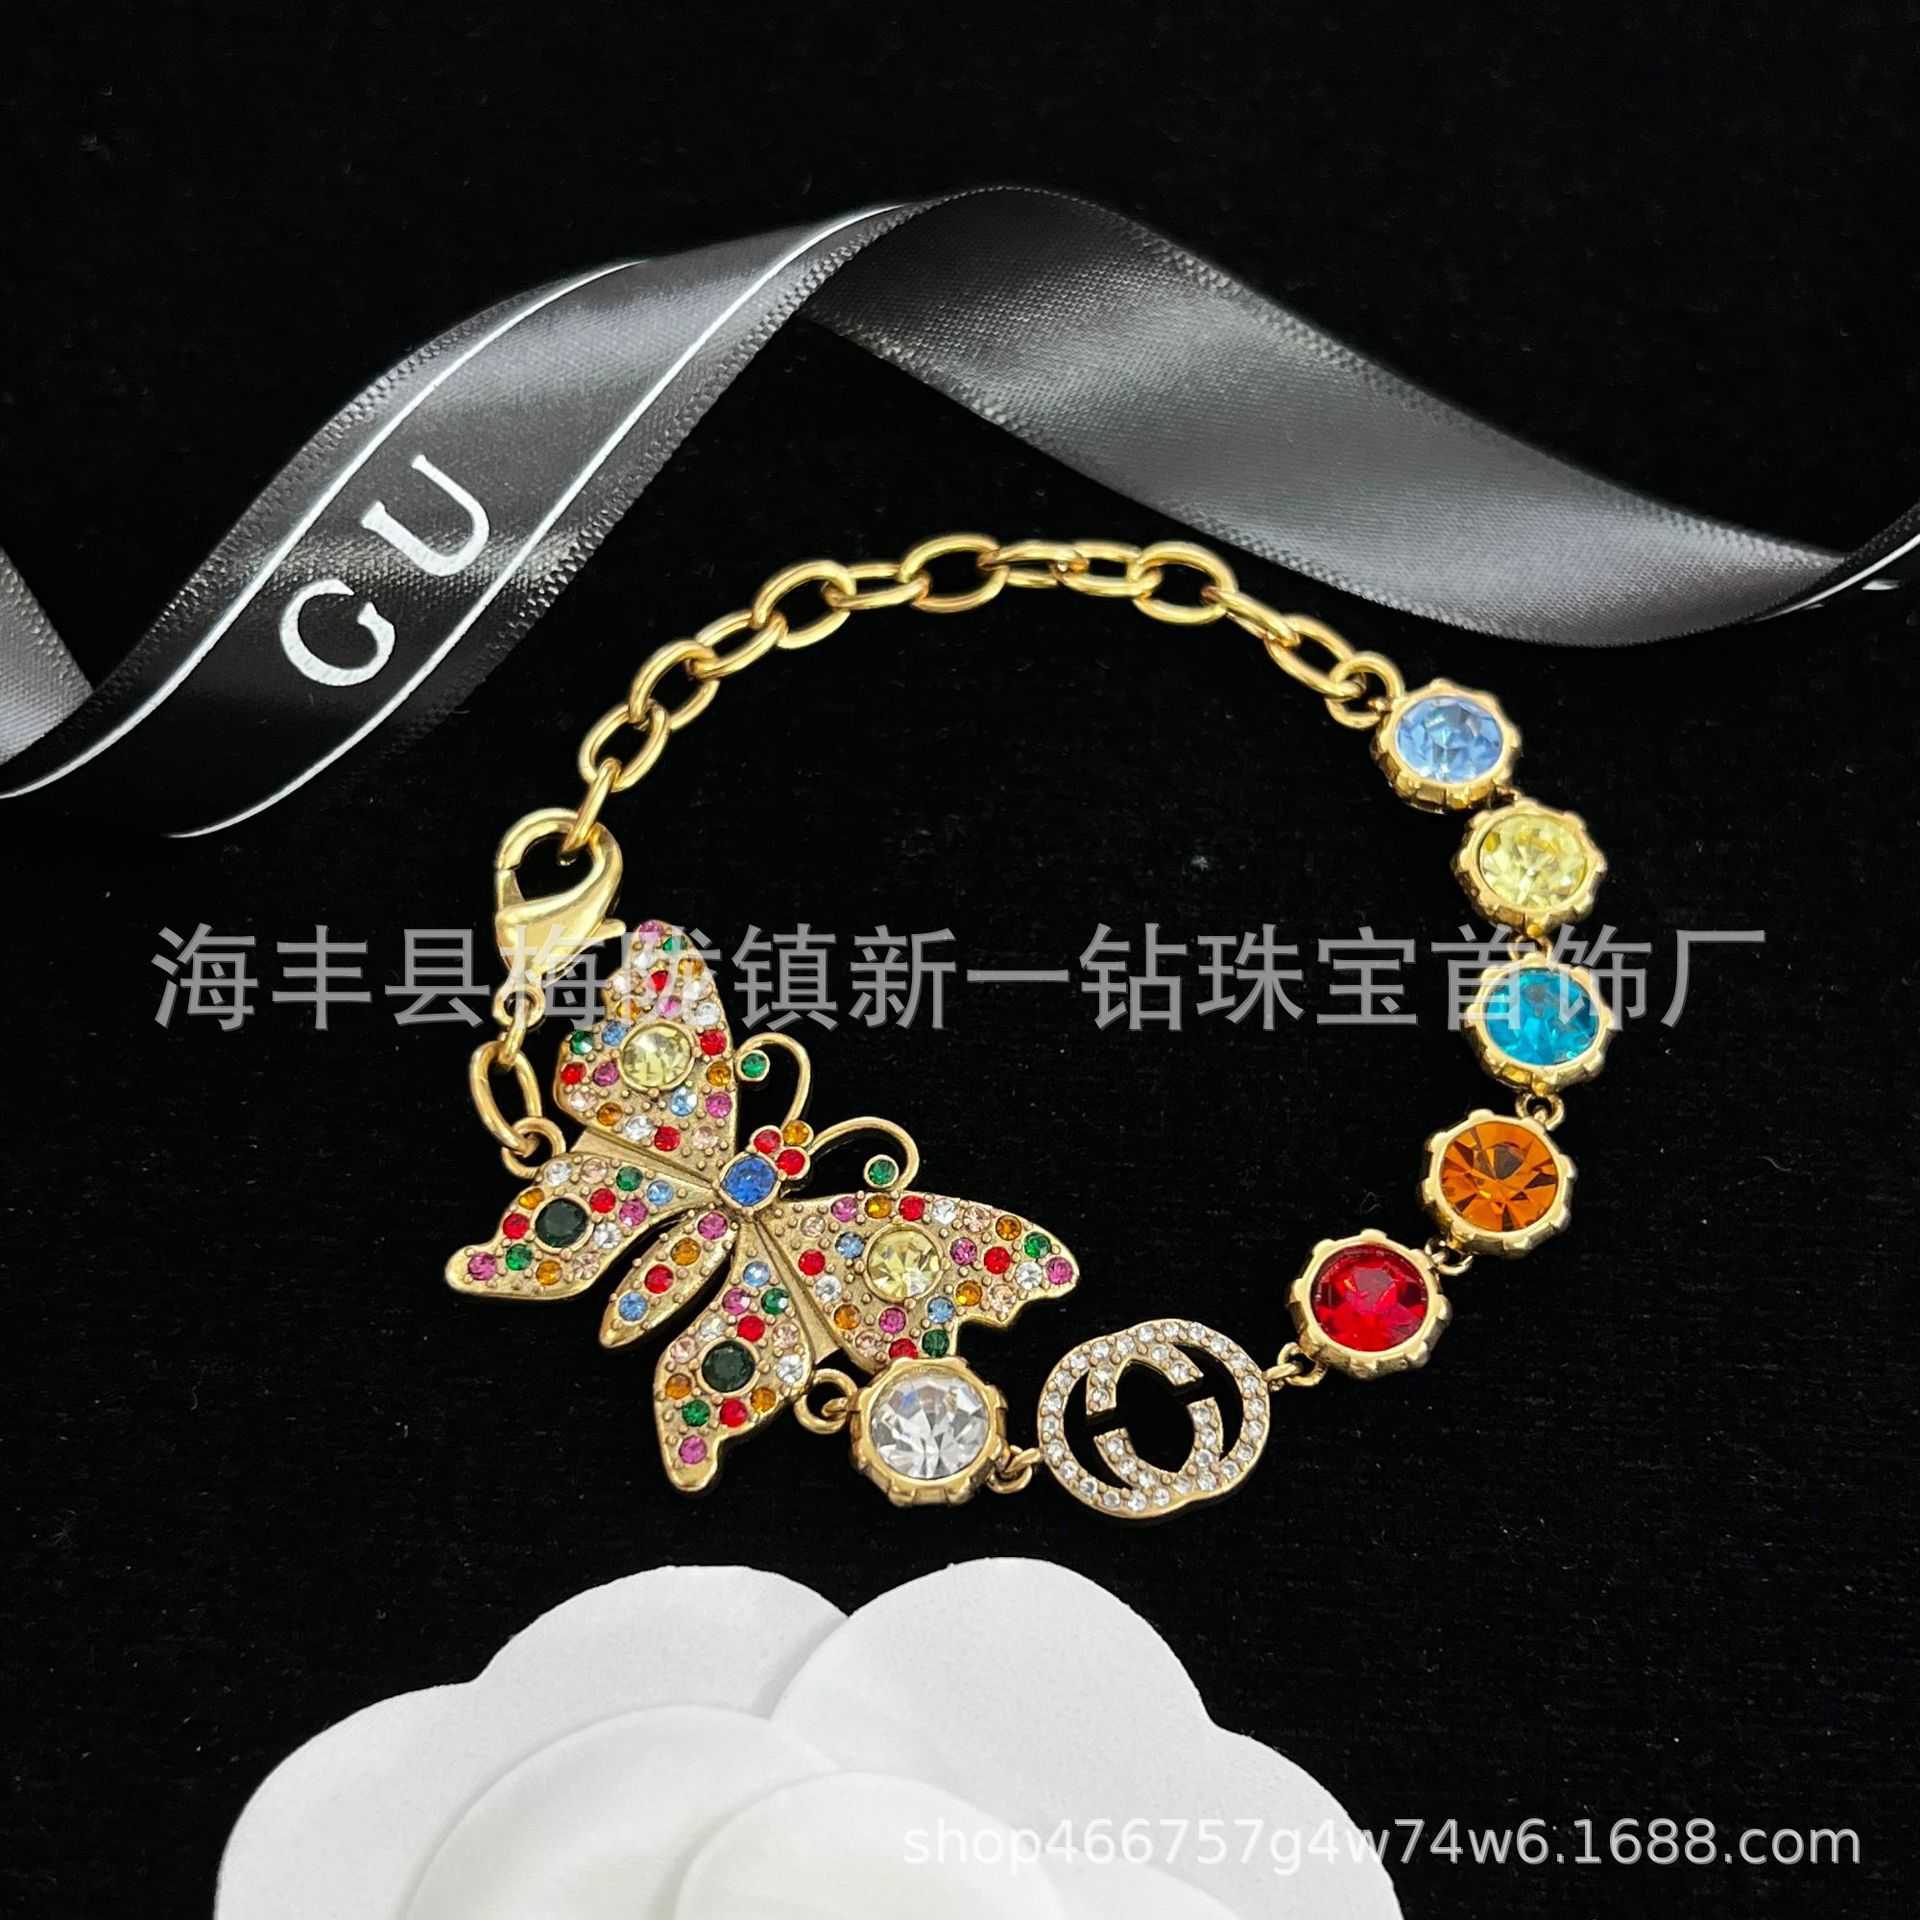 Design luxury jewelry temperament candy color necklace personality full diamond butterfly bracelet family earring ring